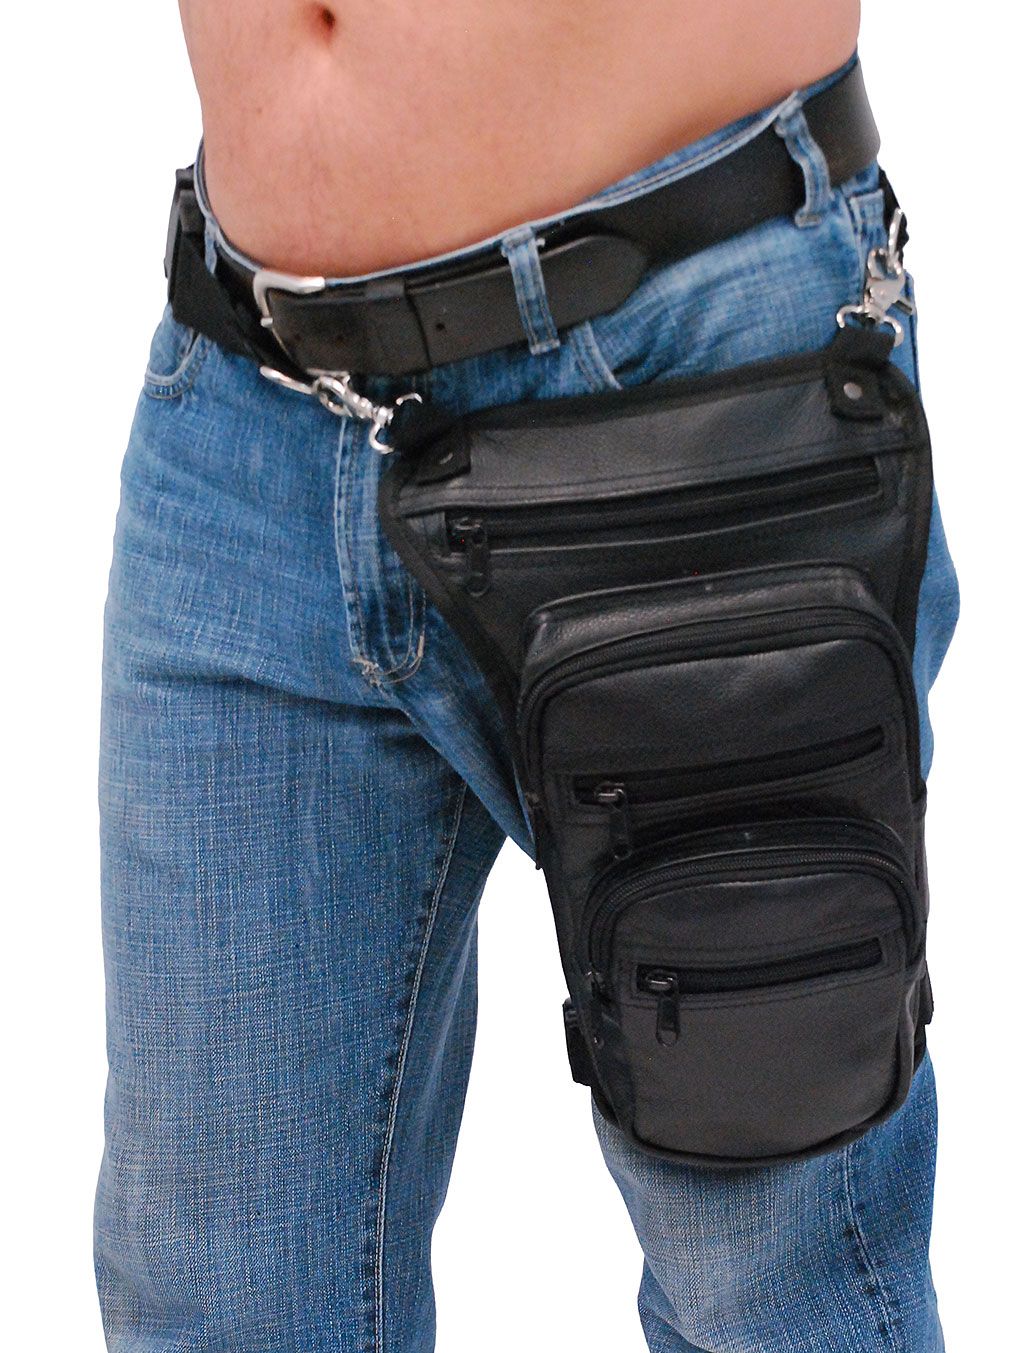 biker wearing a black leather holster clip pouch